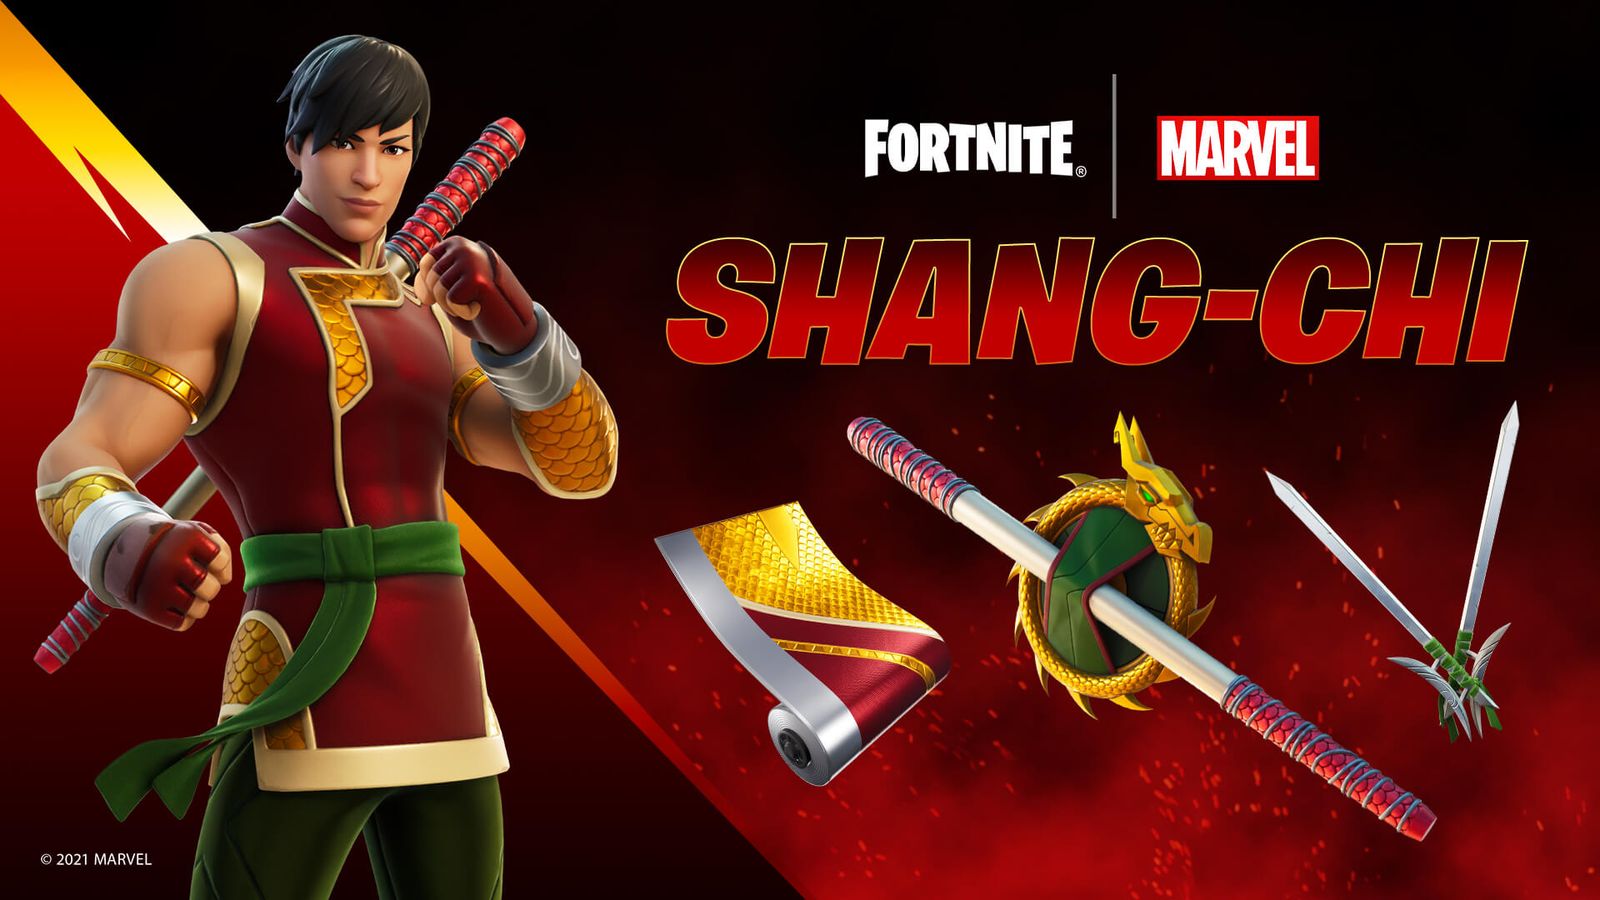 This image displays the contents of the Shang-Chi cosmetic bundle in Fortnite.